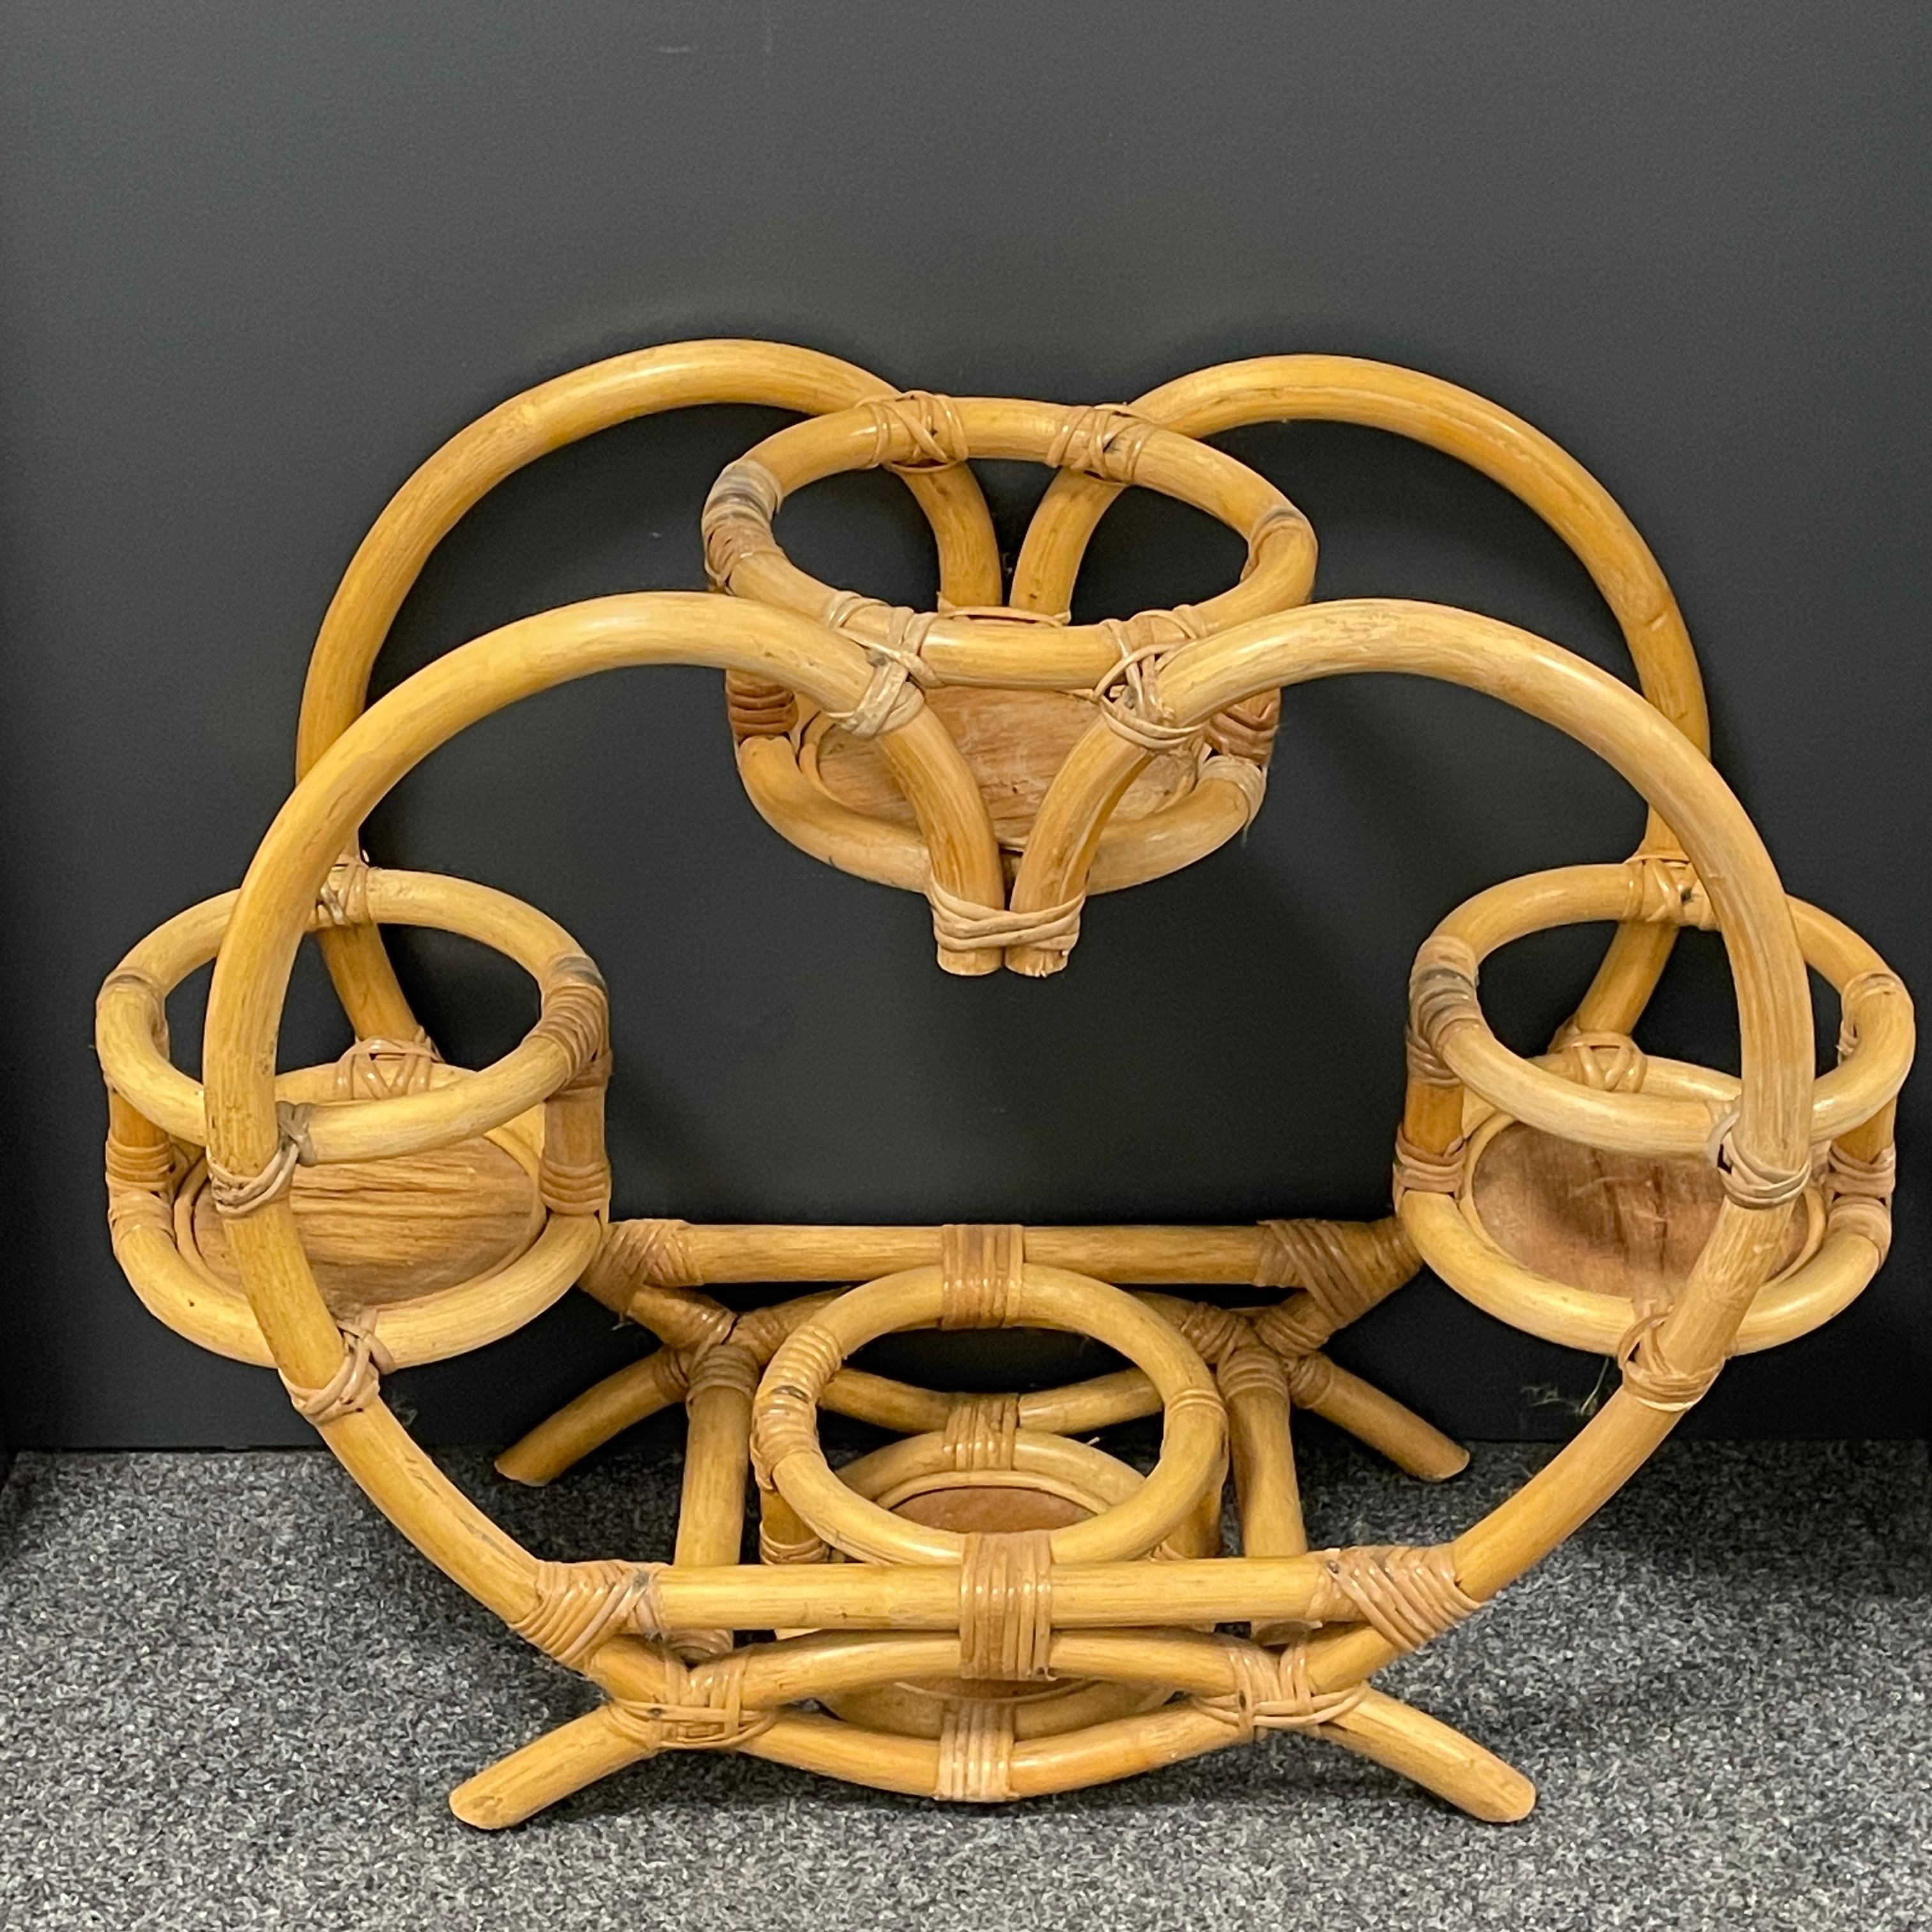 An amazing Mid-Century Modern plant stand, flower pot holder or shelf. Made in Germany, circa 1970s. This is a beautiful all original item in good condition. It has some signs of use, scratches to the wooden plates and patina to the wood, but this